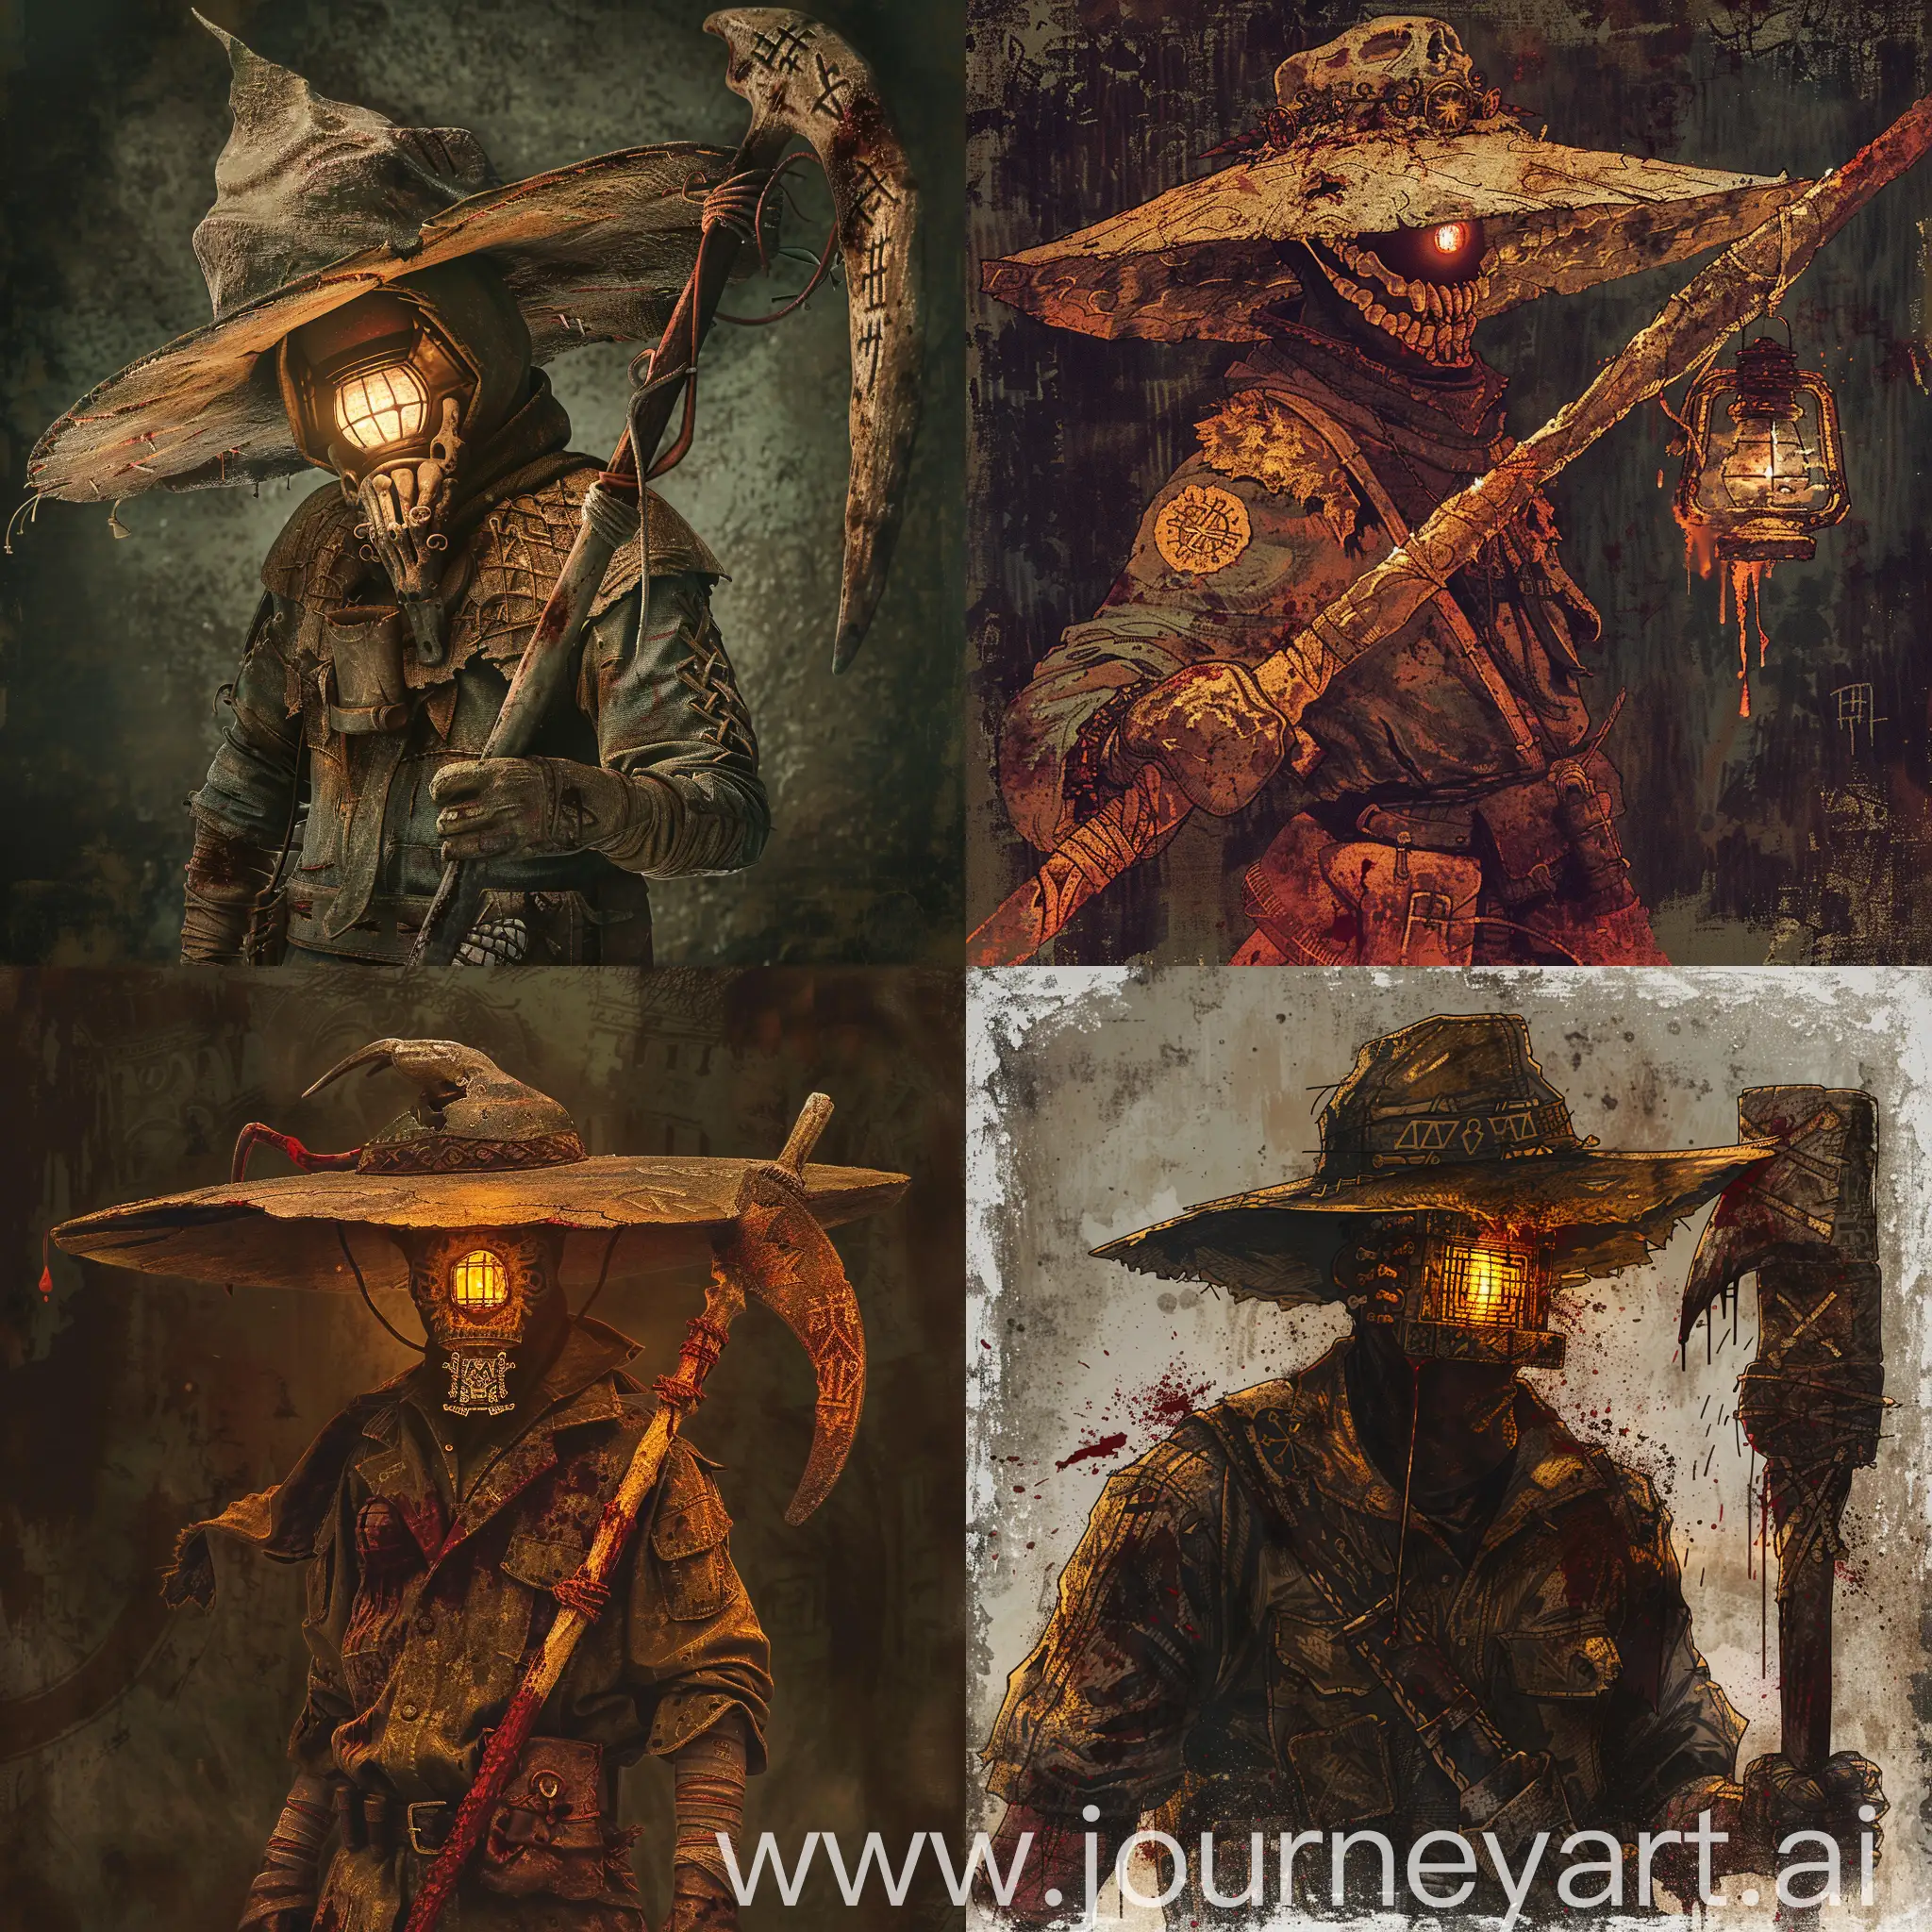 Delving into the depths of forgotten tombs, the prospector wears a mask fashioned in the likeness of a flickering lantern. Its eerie glow illuminates the darkness, guiding their path through the labyrinthine catacombs. A wide-brimmed hat, adorned with runes of protection, shields them from the malevolent forces that dwell within., wields a massive sycthe made of bones, 1970's dark fantasy book cover style, gritty, dark, vintage, detailed, full body shot camera angle, bloody weapon